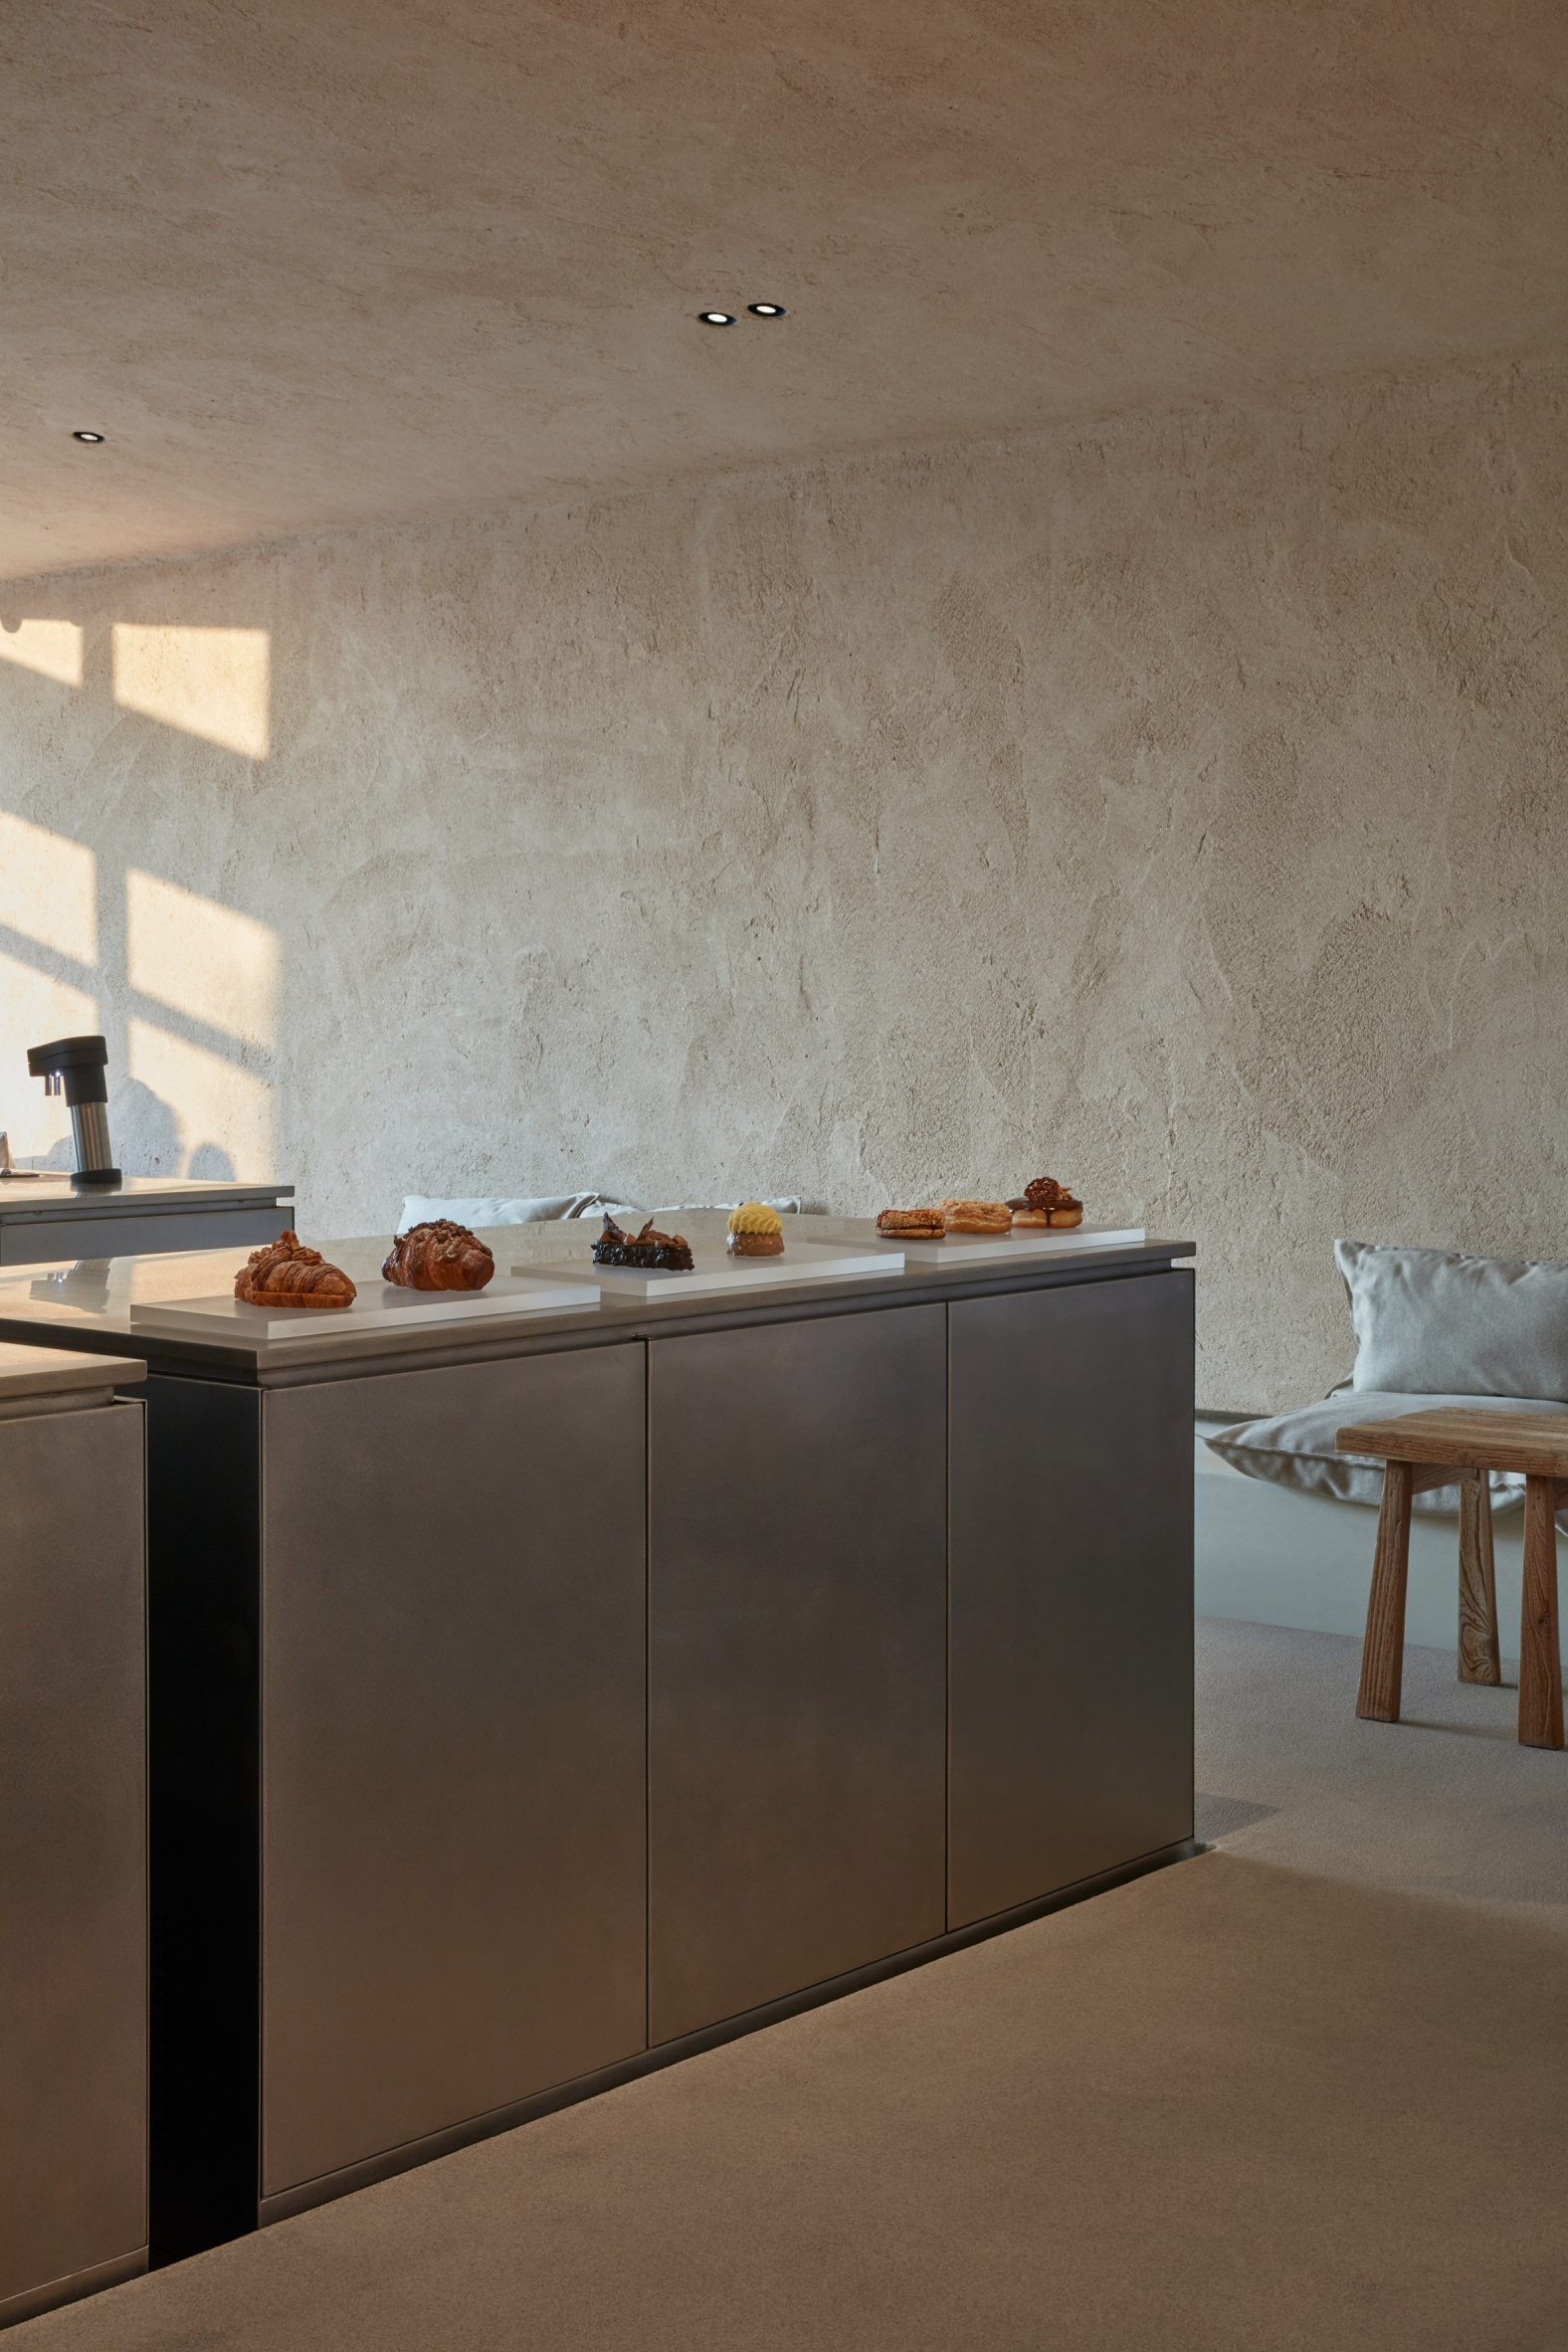 A kitchen counter and sandy wall with Arakabe finish